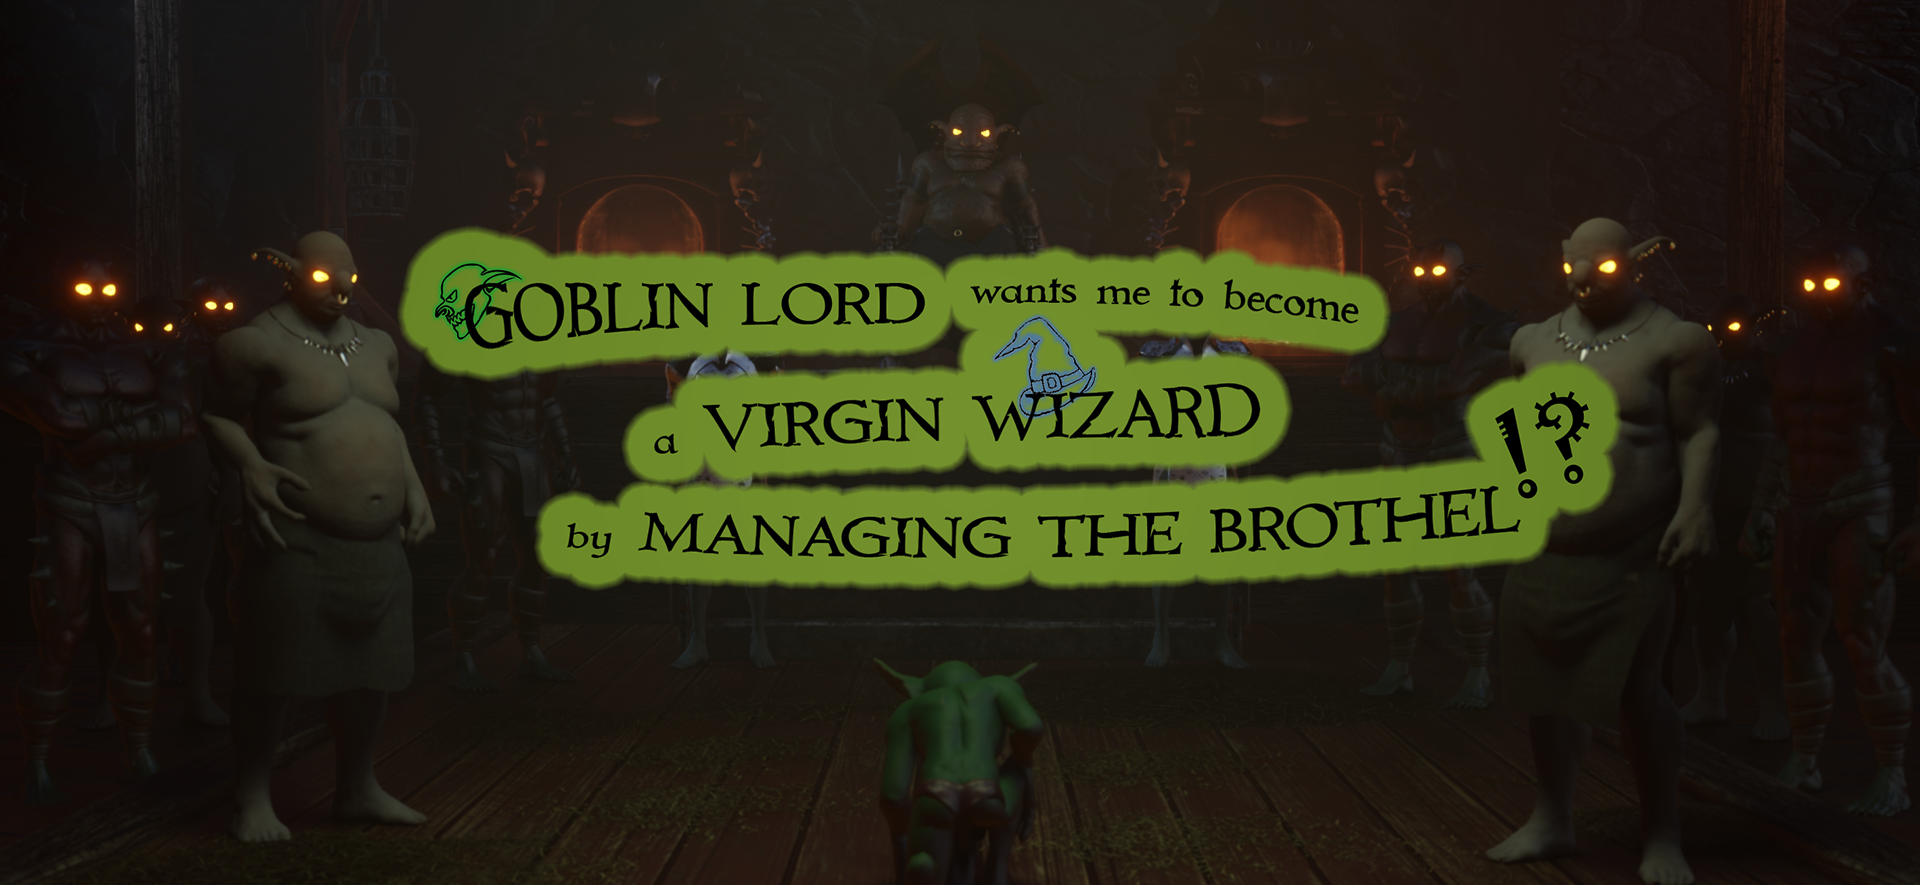 Goblin Lord wants me to become a Virgin Wizard by Managing The Brothel!?